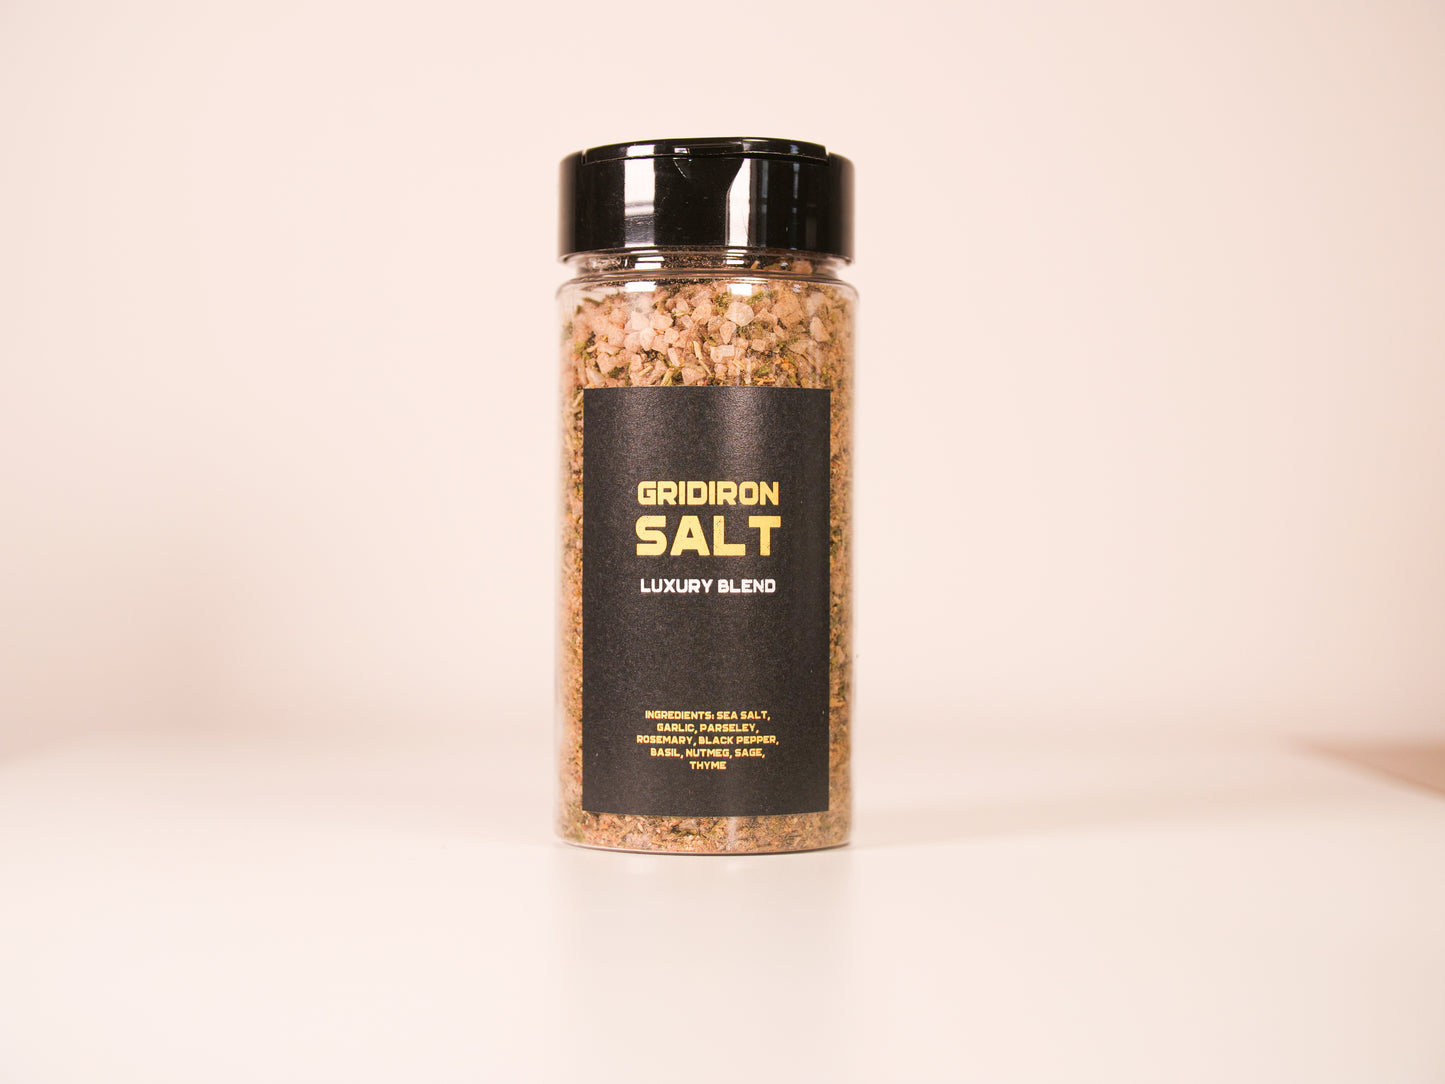 Gridiron Salt - All Blends Collection - Seasoned Sea Salt - All-Purpose - Gourmet Seasonings With Herbs and Spices - All Natural Seasoning for Cooking, For Steak, Fish, Poultry, & More